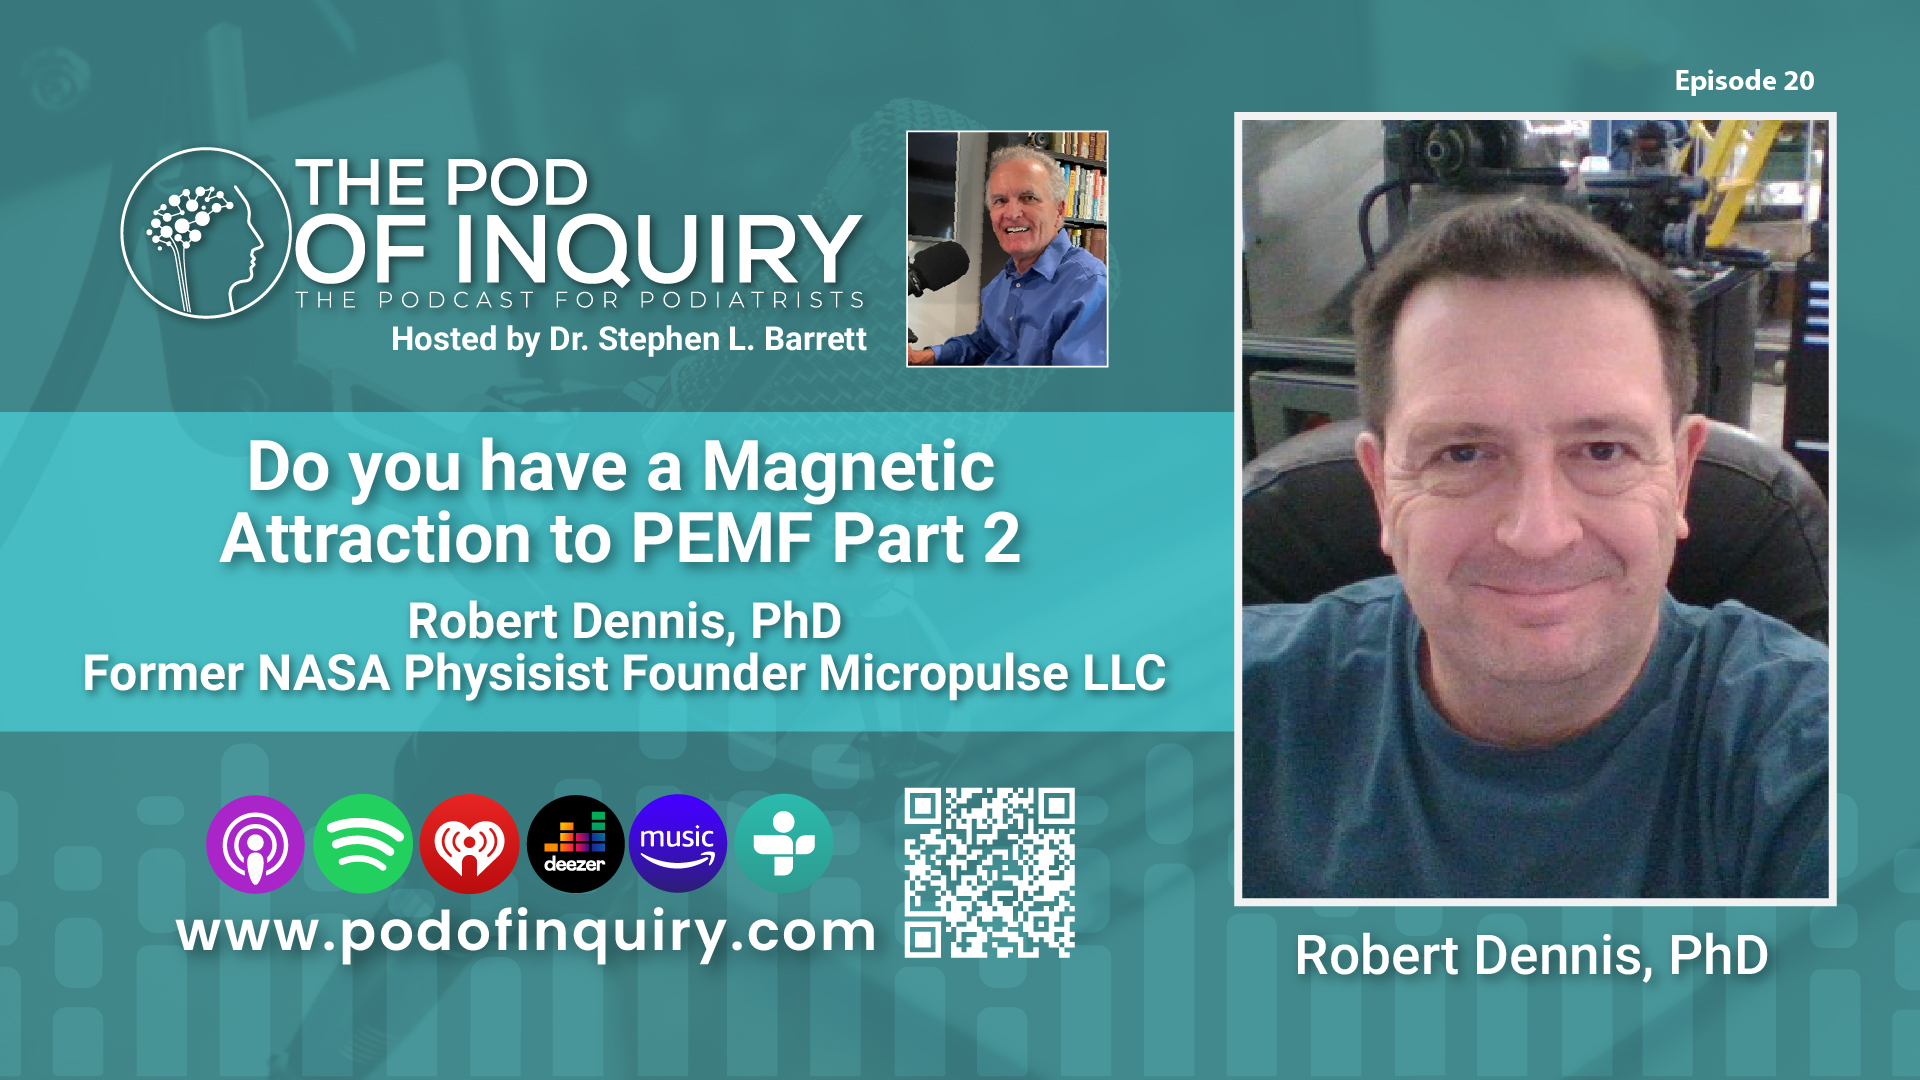 Do you have a Magnetic Attraction to PEMF Part 2